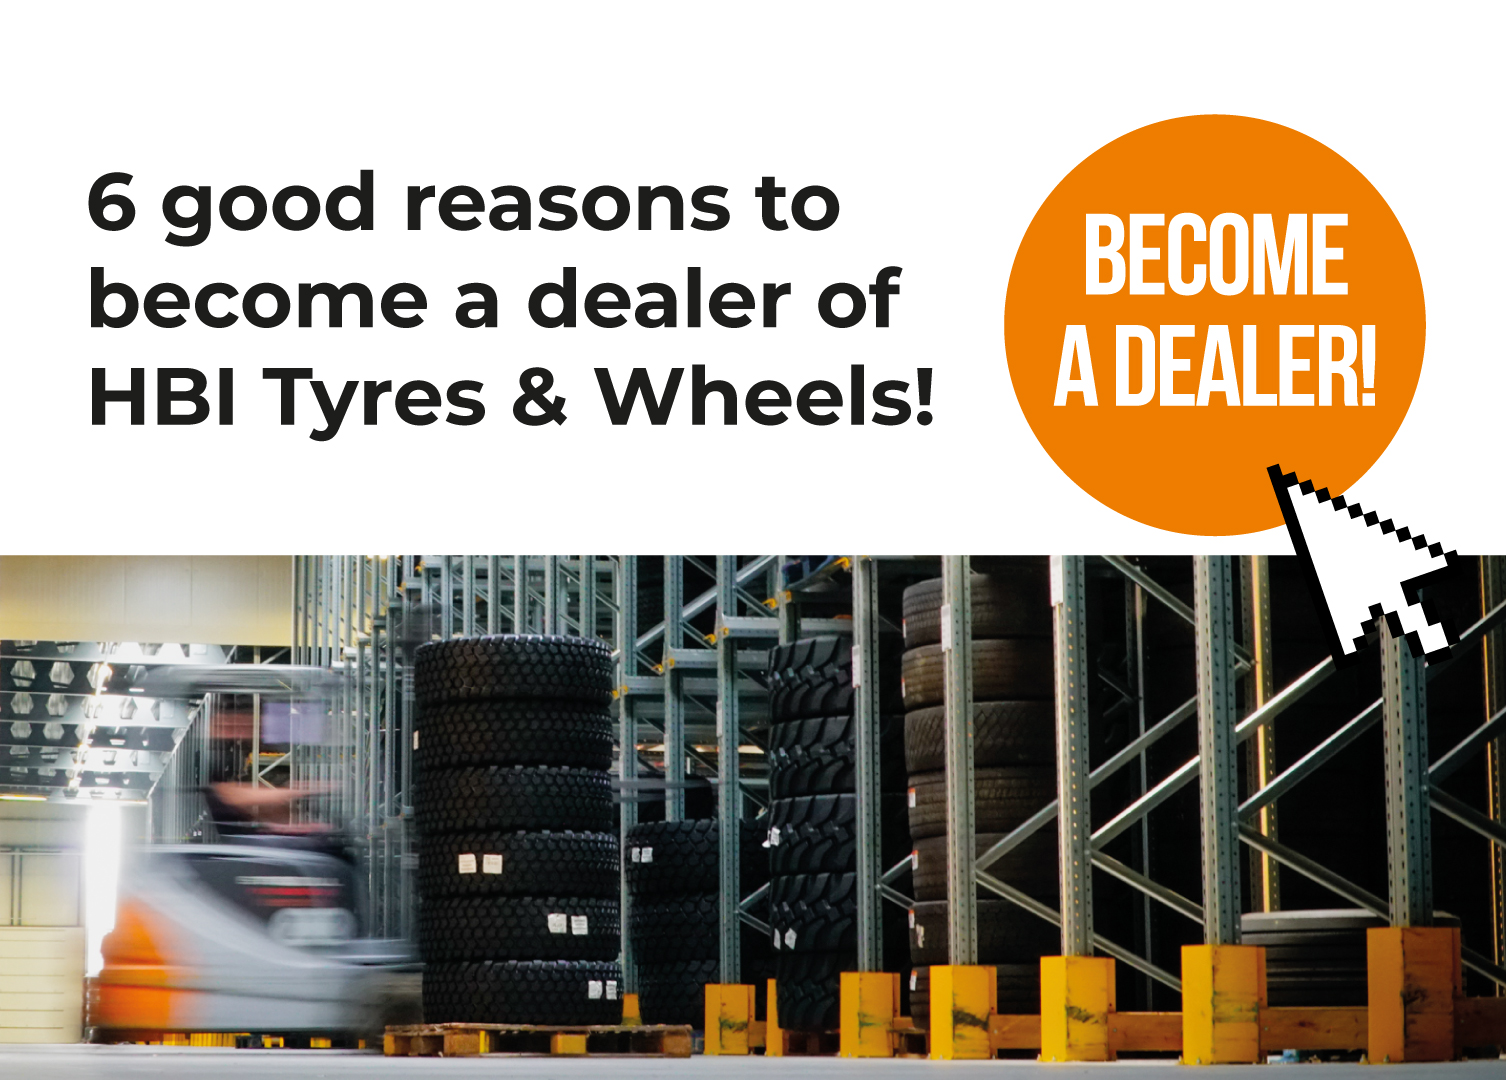 6 good reasons to become a dealer of HBI Tyres & Wheels!